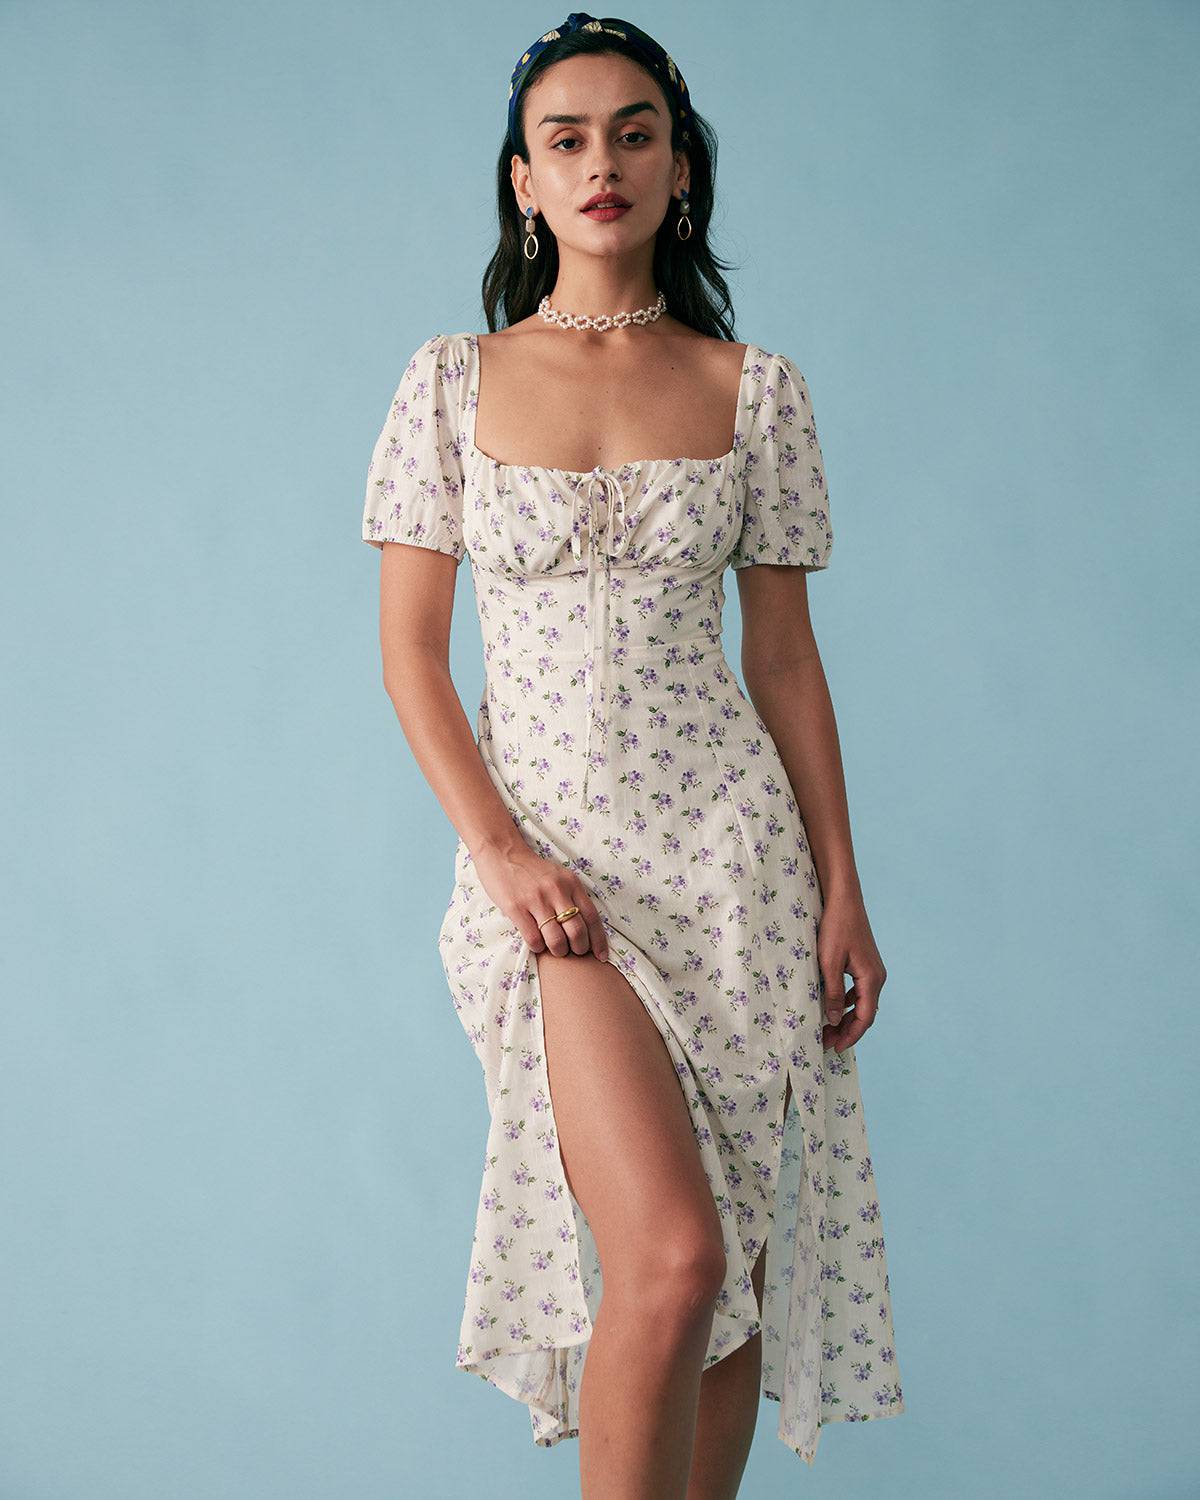 Is there any dupes for Monique Lhuillier floral dresses? I'm obsessed with  them but I don't want to pay more for the dress than I do the entire venue.  Planning to get